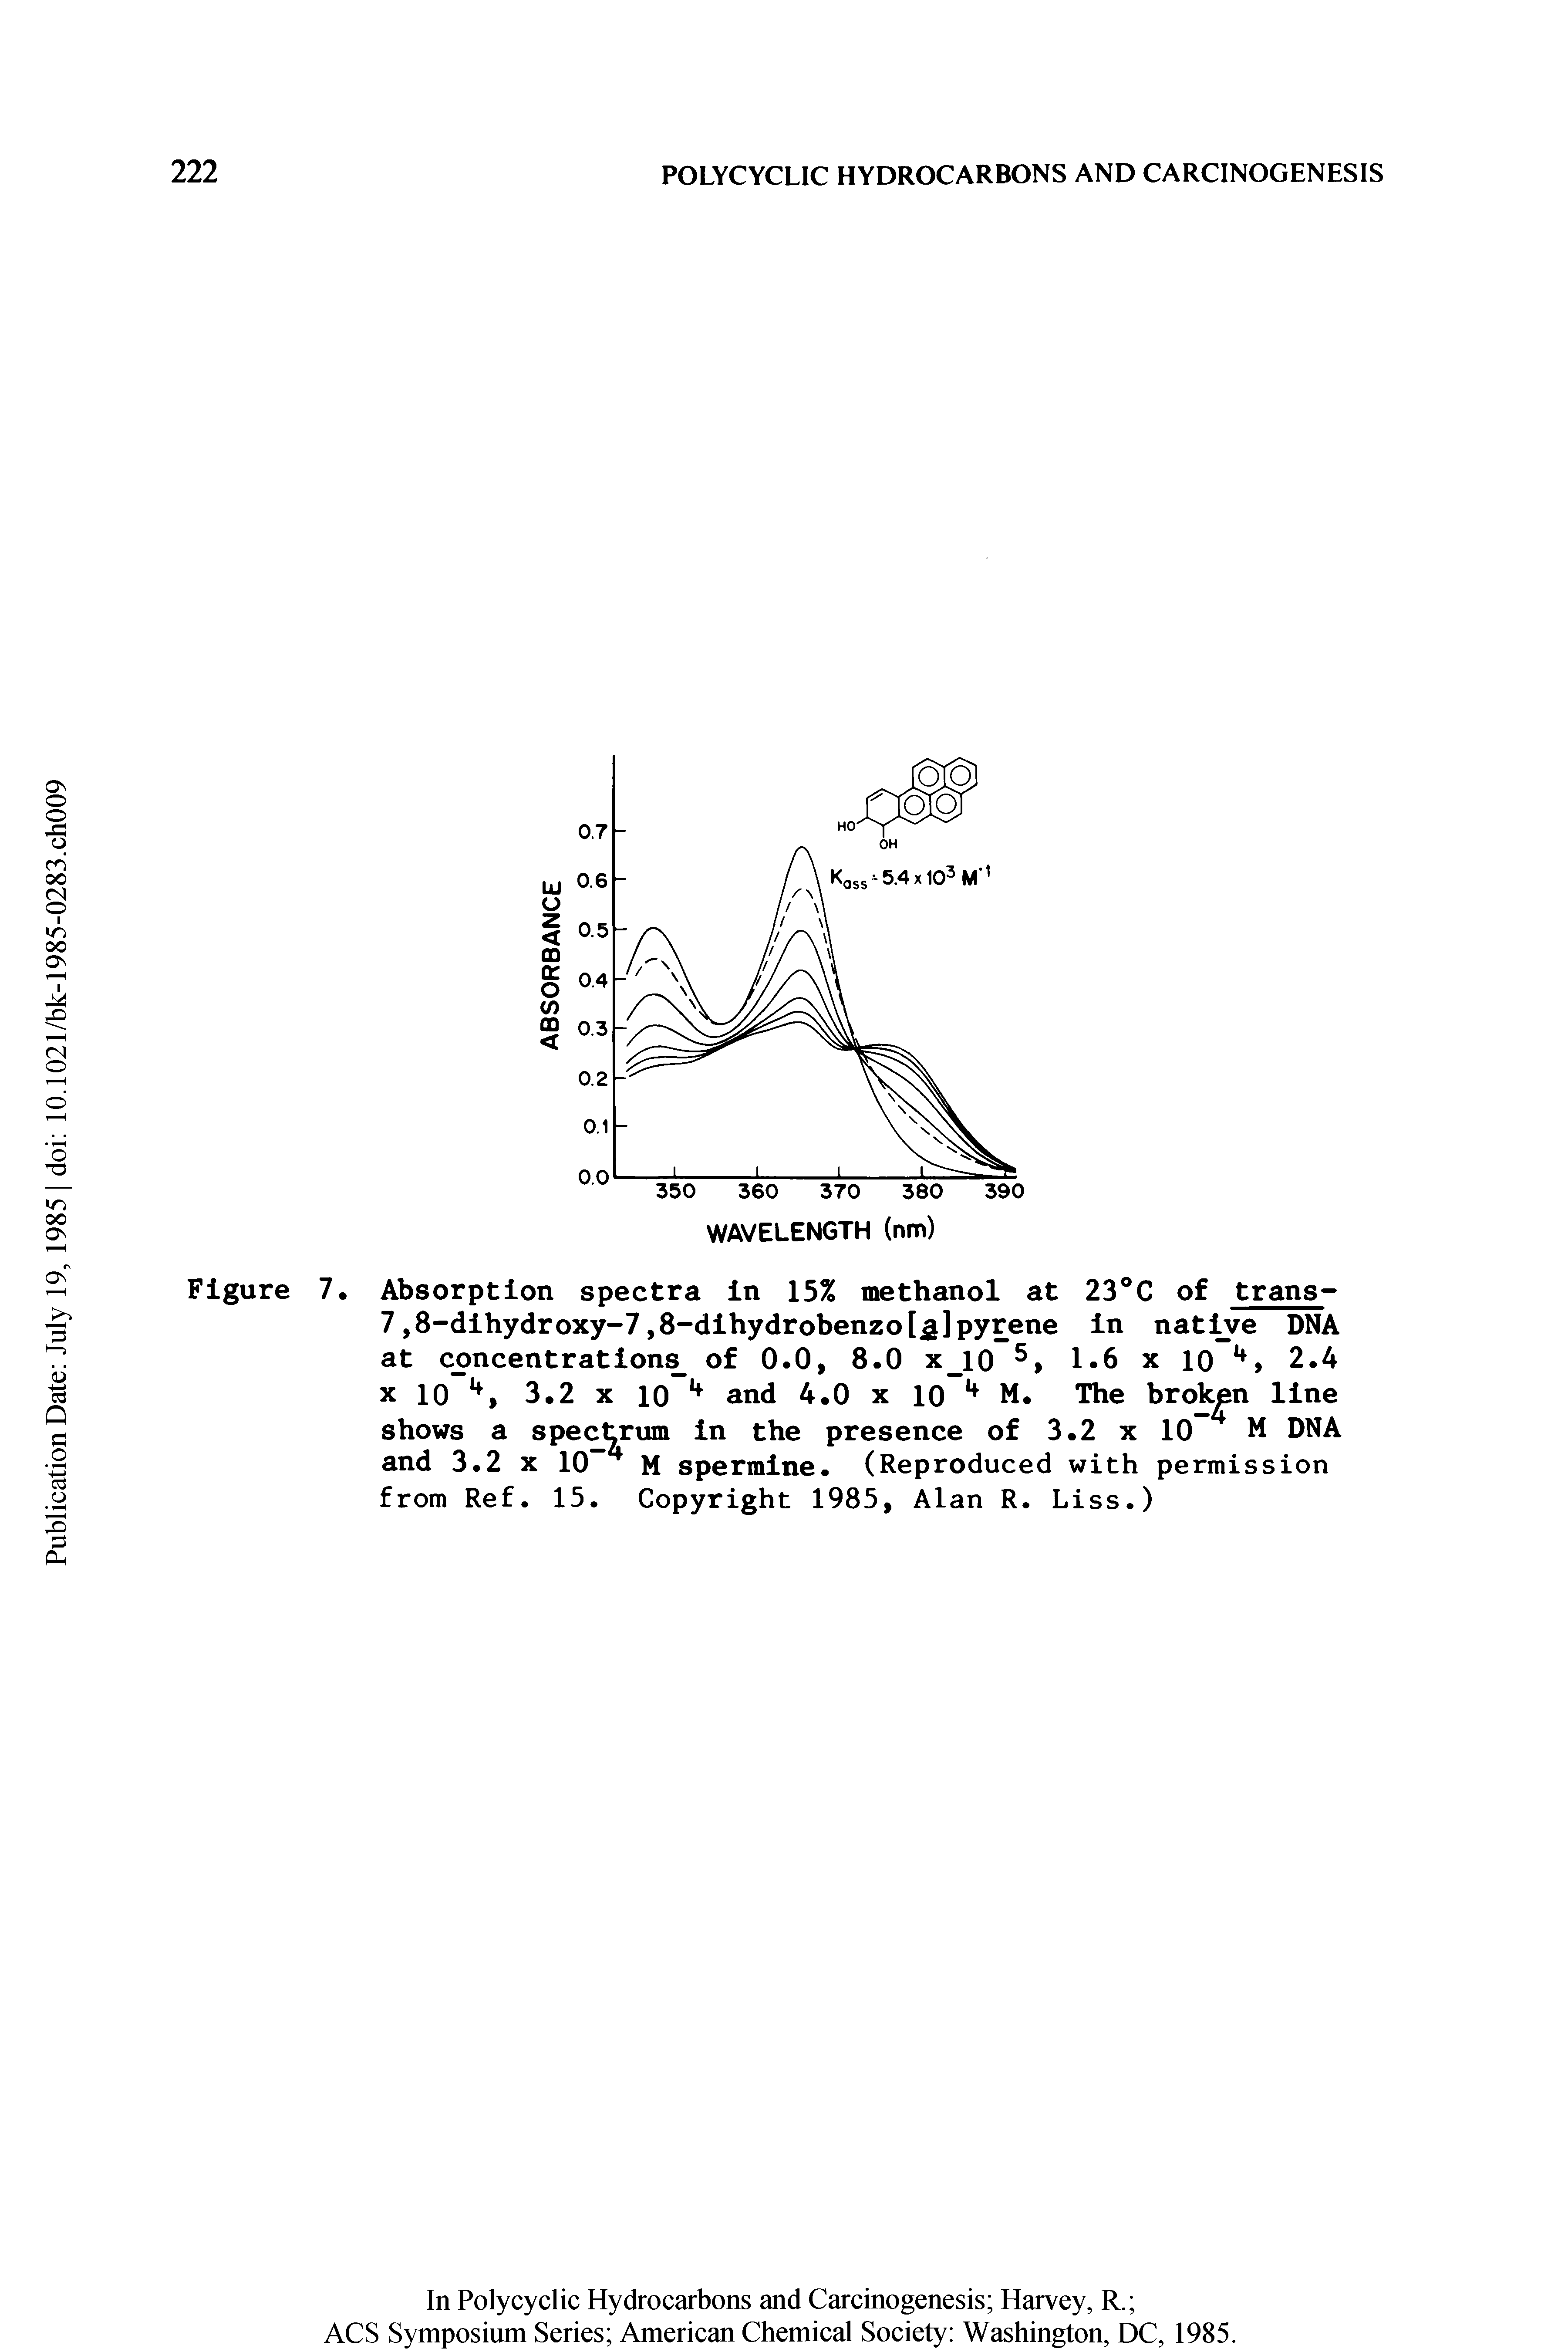 Figure 7. Absorption spectra in 15% methanol at 23°C of trans-7,8-dihydroxy-7,8-dihydrobenzo[5]pyrene in native DNA at concentrations of 0.0, 8.0 x l0 5, 1.6 x 10 2.4 x 10, 3.2 x 10 and 4.0 x 10 M. The broken line shows a spectrum in the presence of 3.2 x 10 M DNA and 3.2 x 10 M spermine. (Reproduced with permission from Ref. 15. Copyright 1985, Alan R. Liss.)...